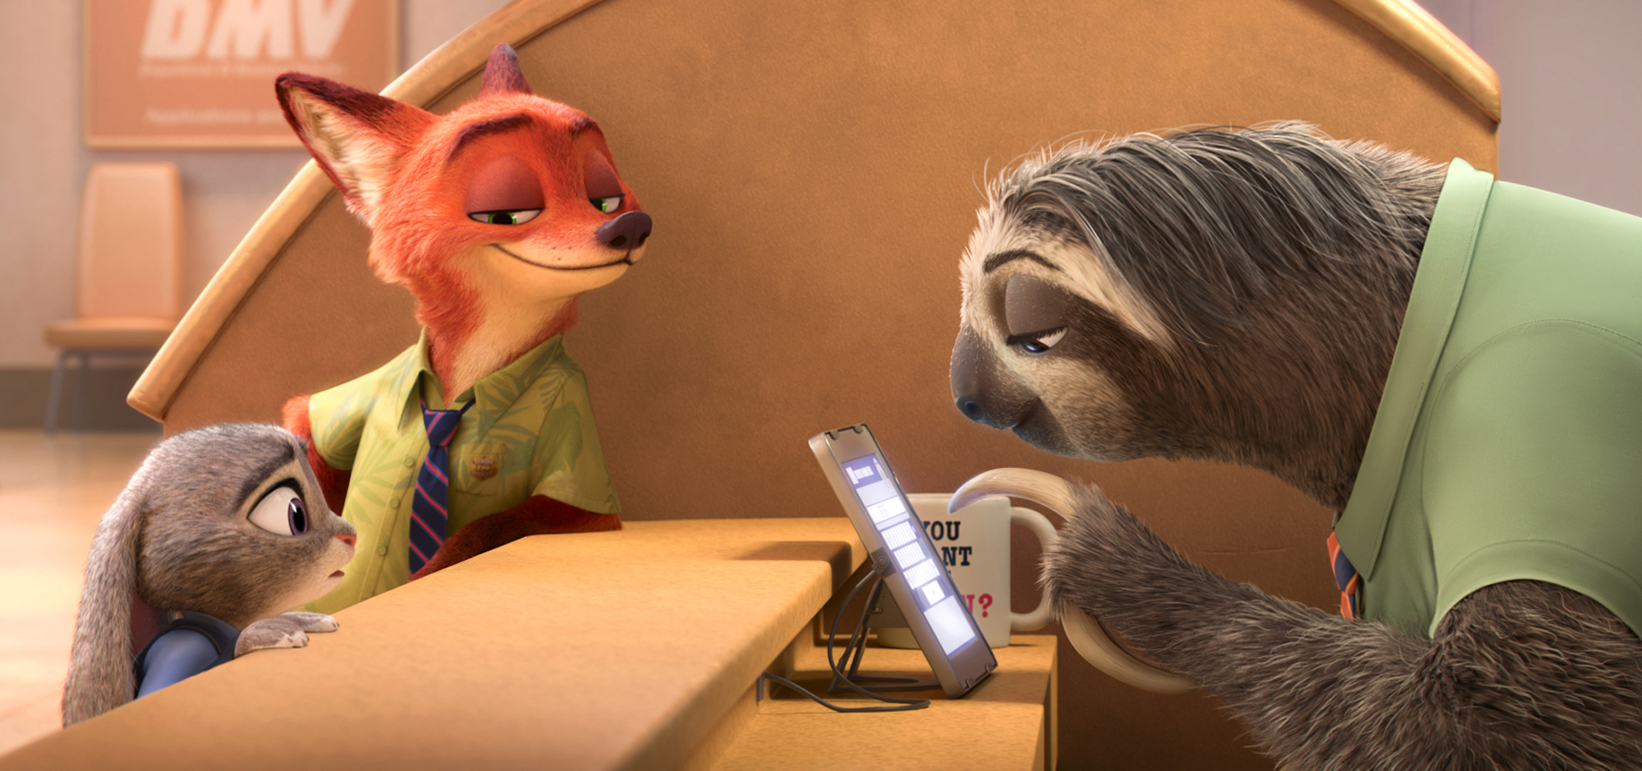 Disney via AP  This image released by Disney shows Judy Hopps, voiced by Ginnifer Goodwin, left, Nick Wilde, voiced by Jason Bateman, second left, in a scene from the animated film, “Zootopia.”